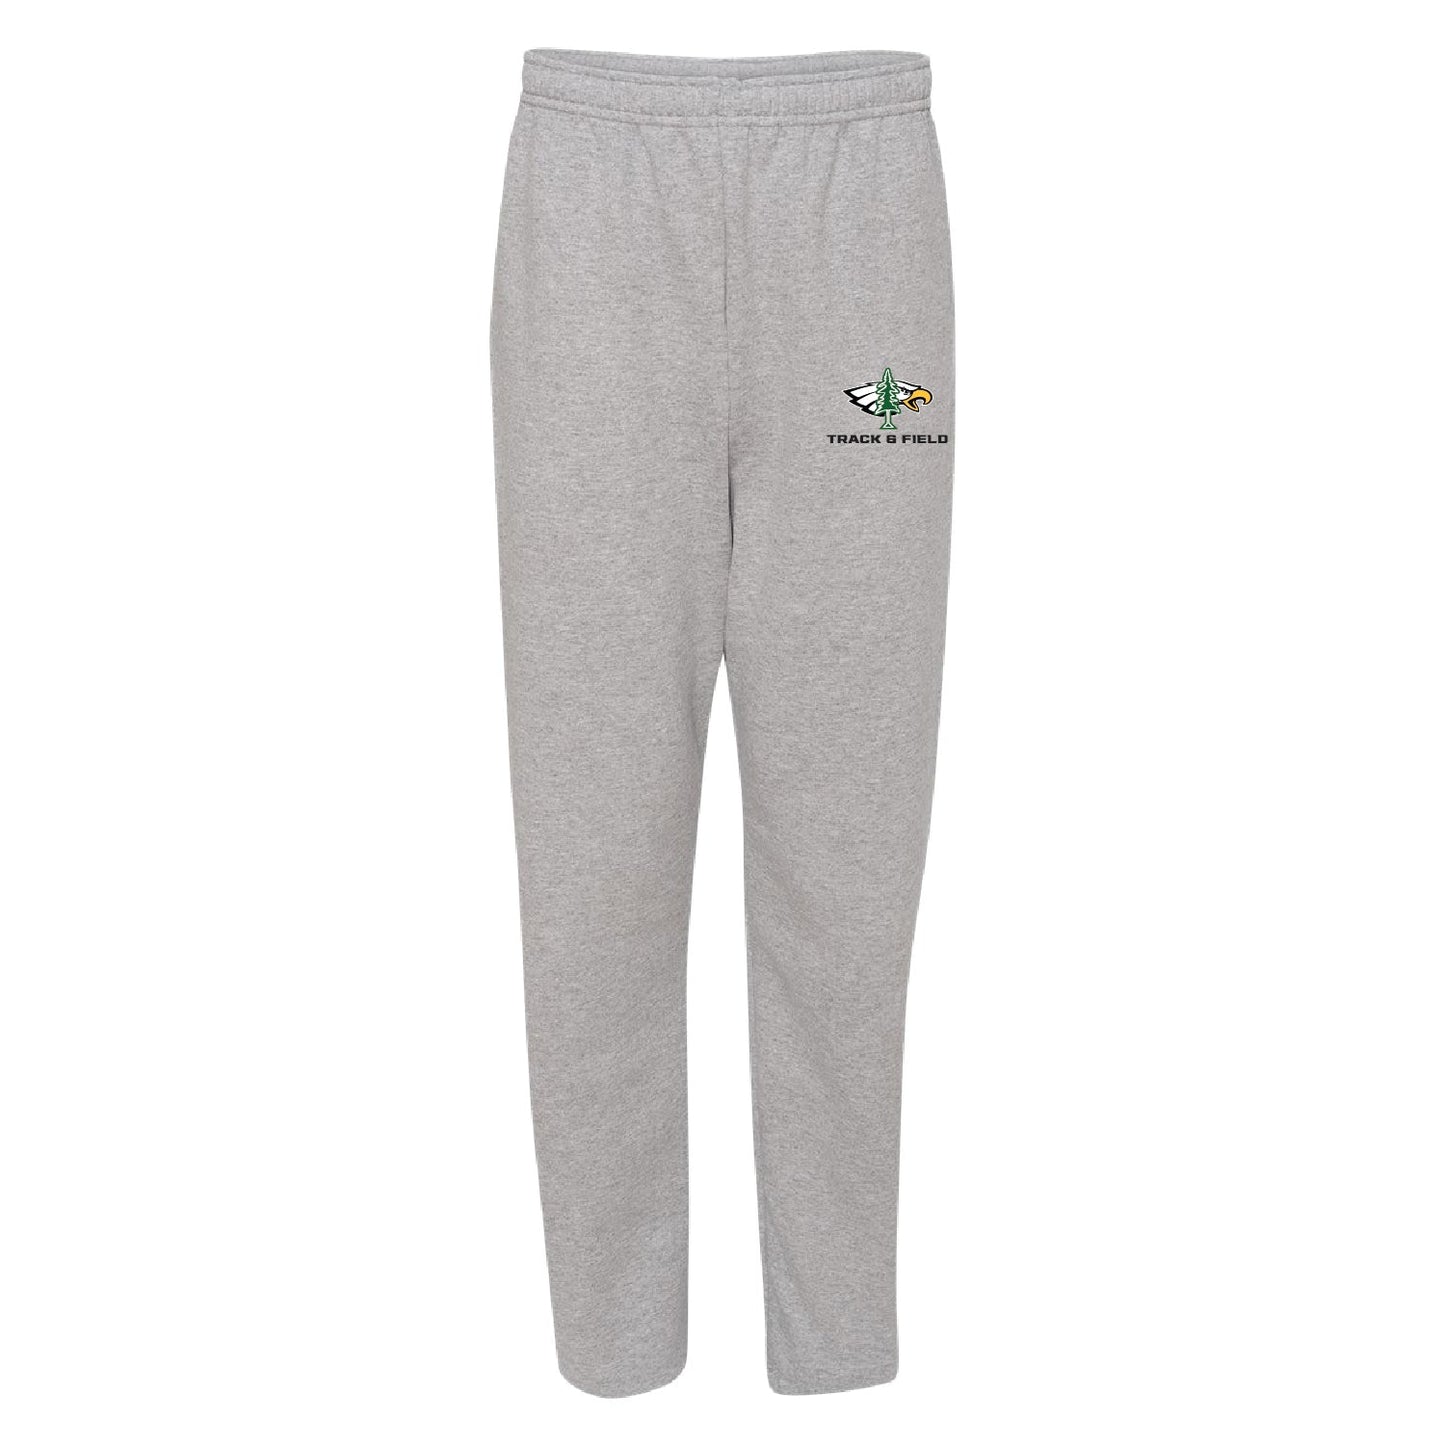 SSN Track & Field Open Bottom Sweatpants with Pockets - DSP On Demand